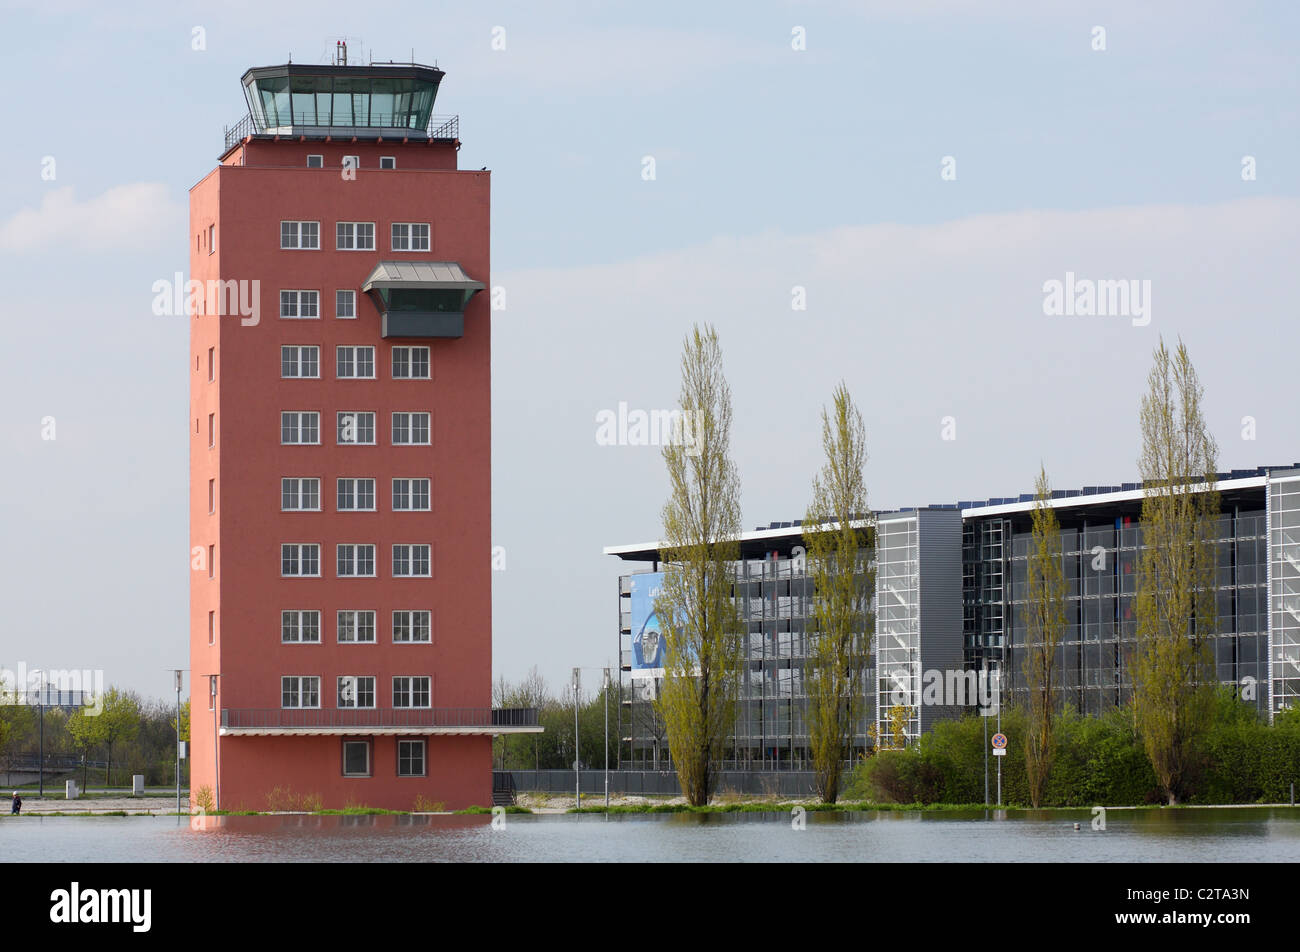 Landmarked tower of the old airport Munich Riem, Germany, Europe. Today it is used as an office building. Stock Photo